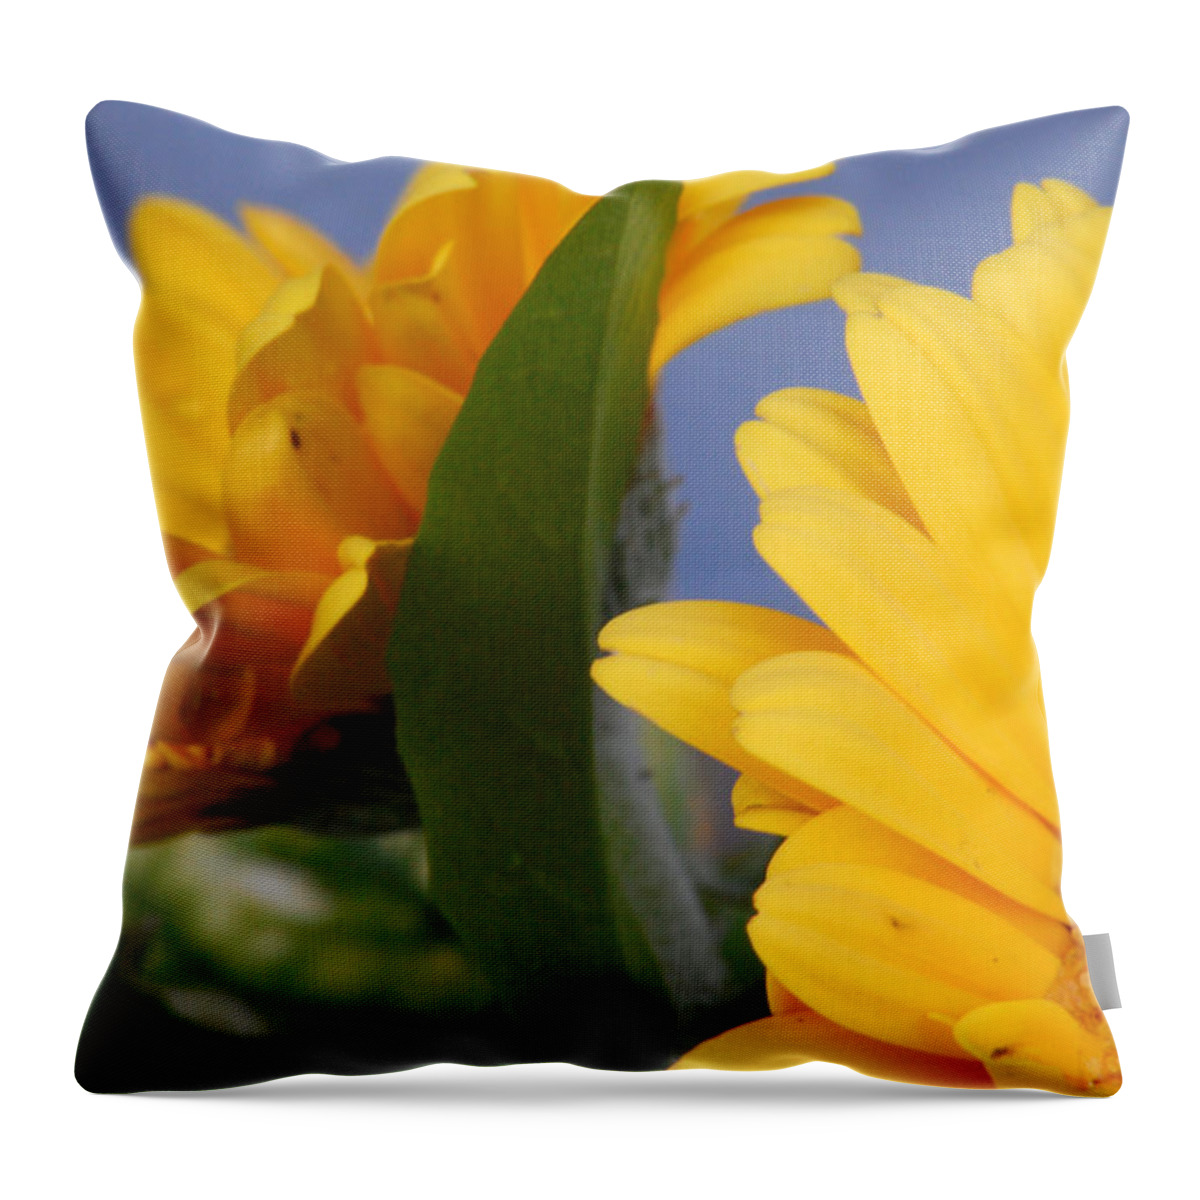 Gerbera Daisy Throw Pillow featuring the photograph Cheerful Gerbera Daisies by Amy Fose